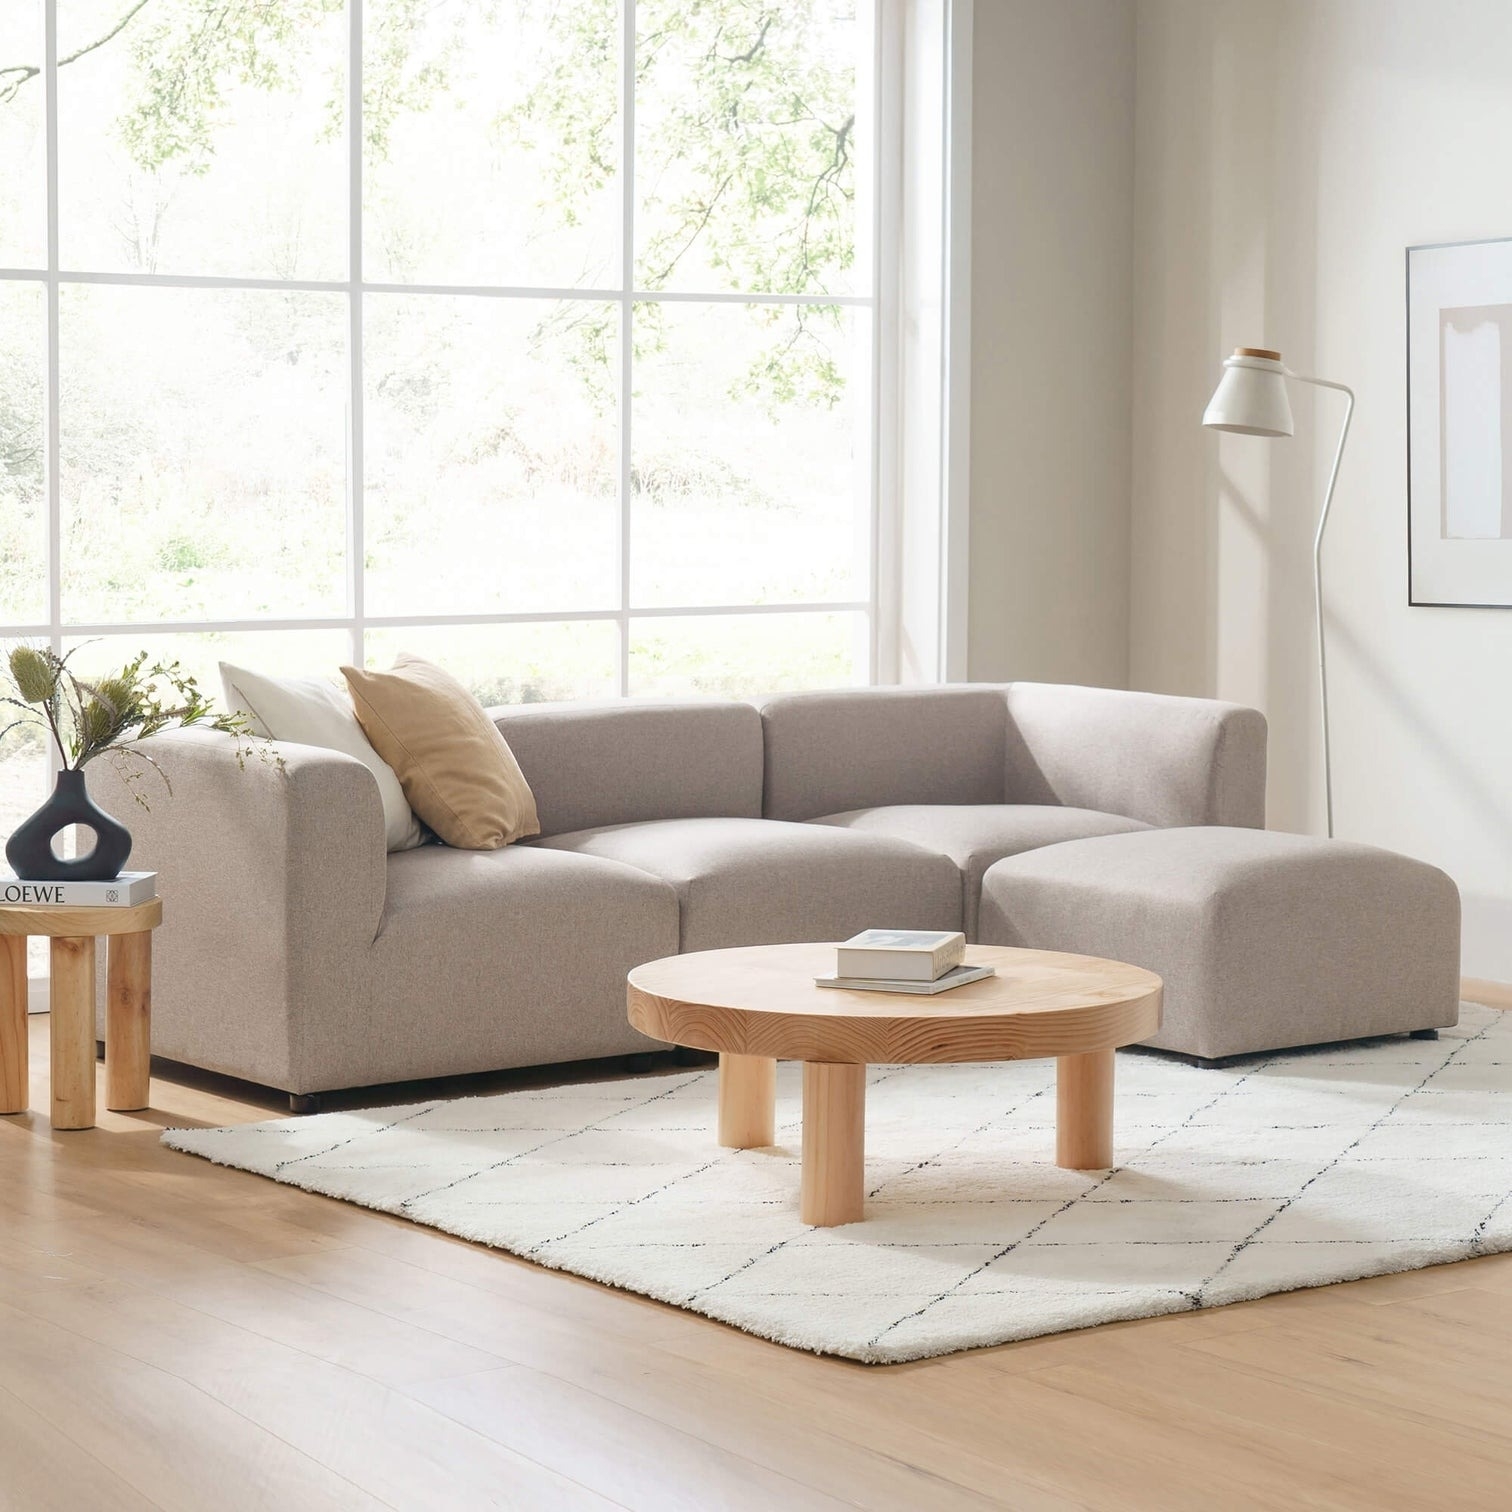 the beige Zinus sectional couch in a living room